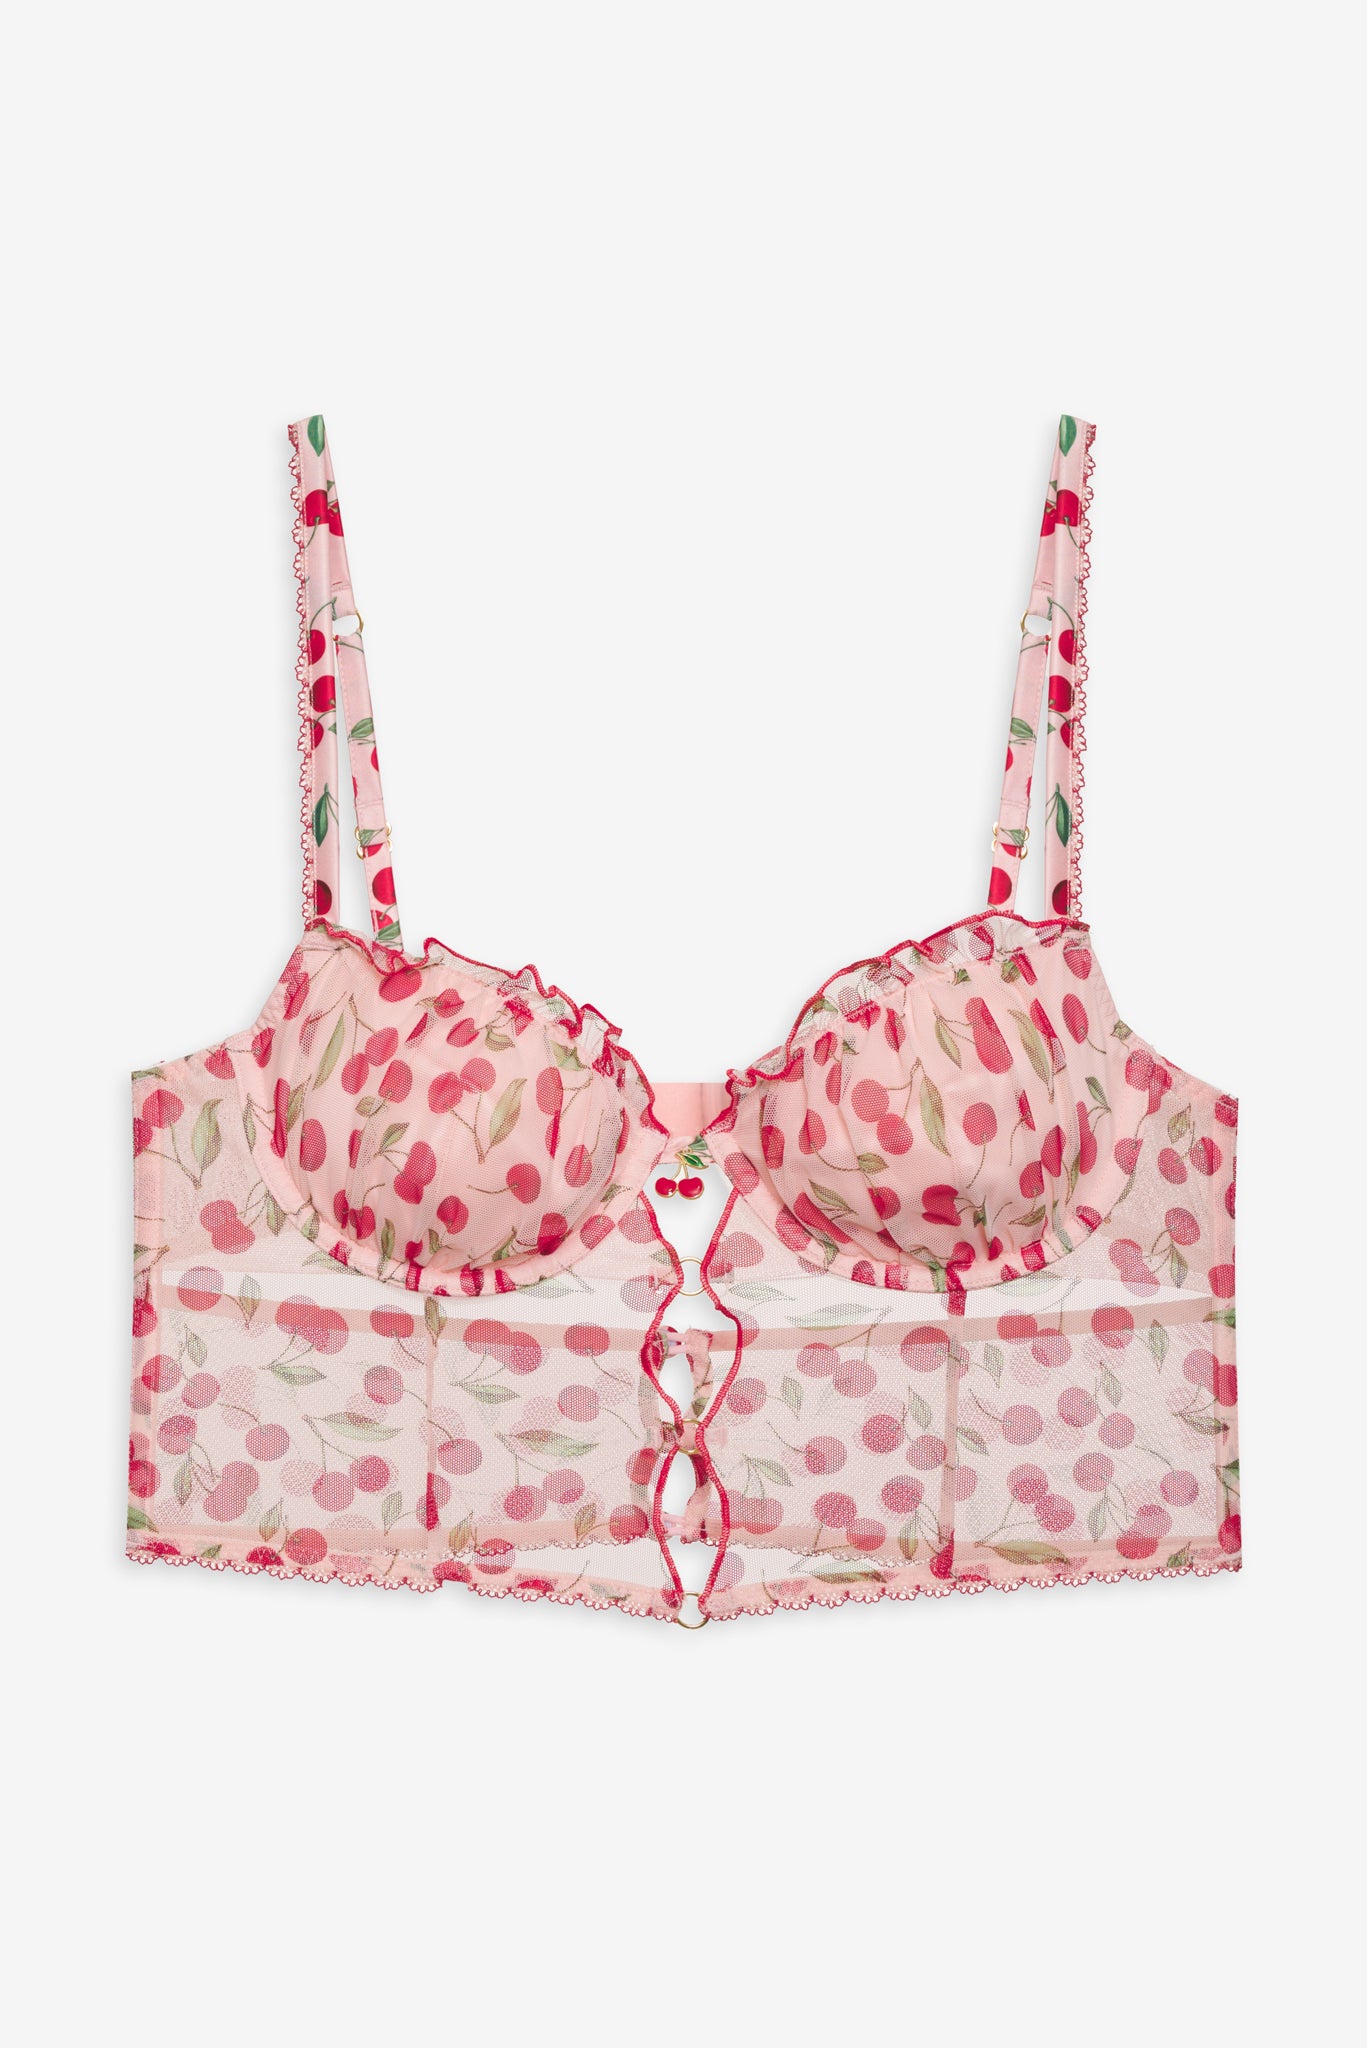 Buy Pink Floral Underbust Corset Cupless Lingerie Online in India 